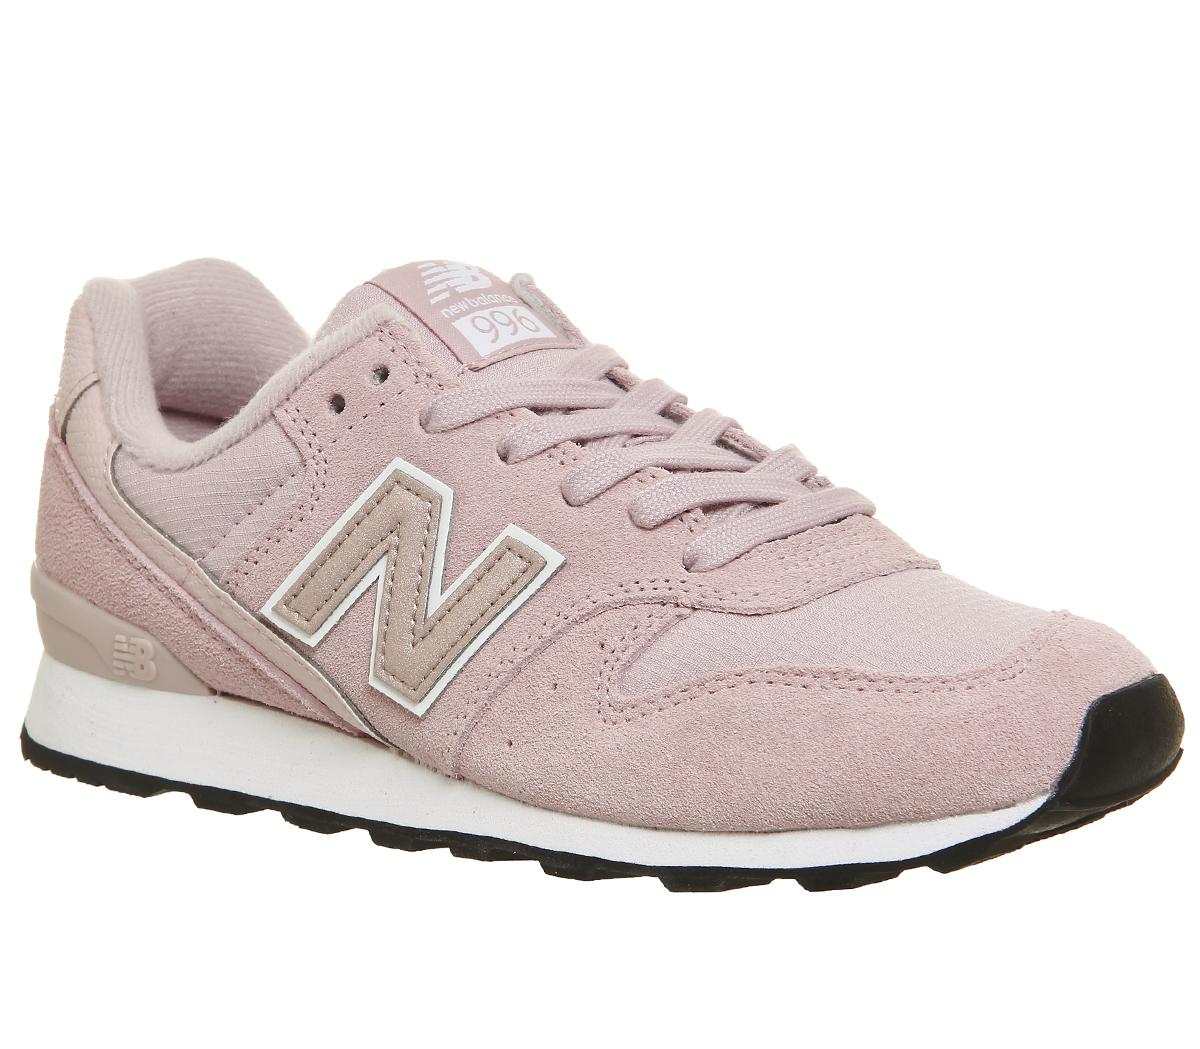 new balance wr996 pink, OFF 70%,Buy!